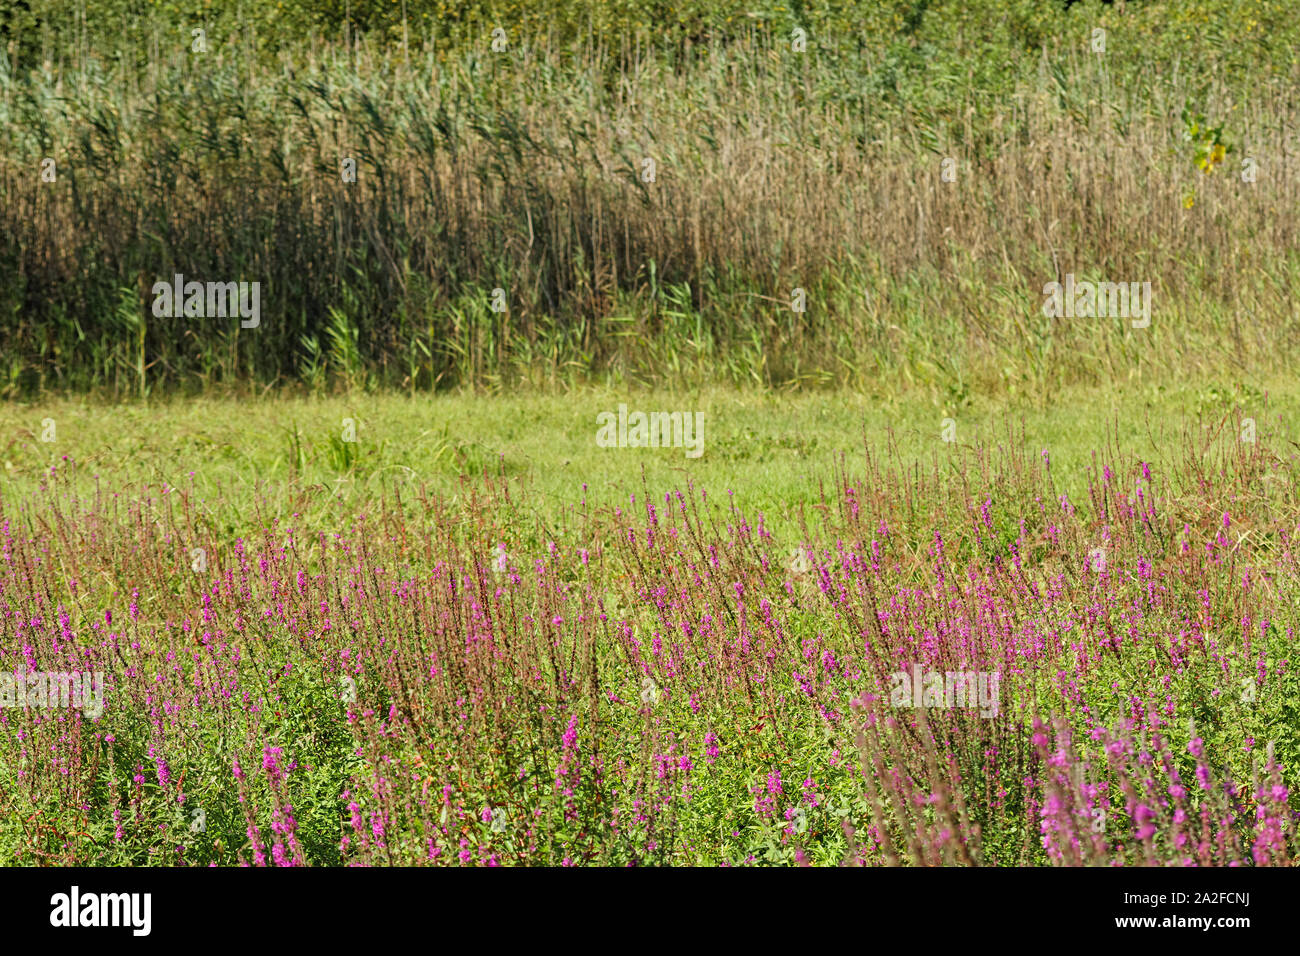 Swathes of magenta / purple wildflowers Swainsona Galegifolia growing on a dried lake bottom and reeds in the back at Belgrad Forest of Istanbul Stock Photo